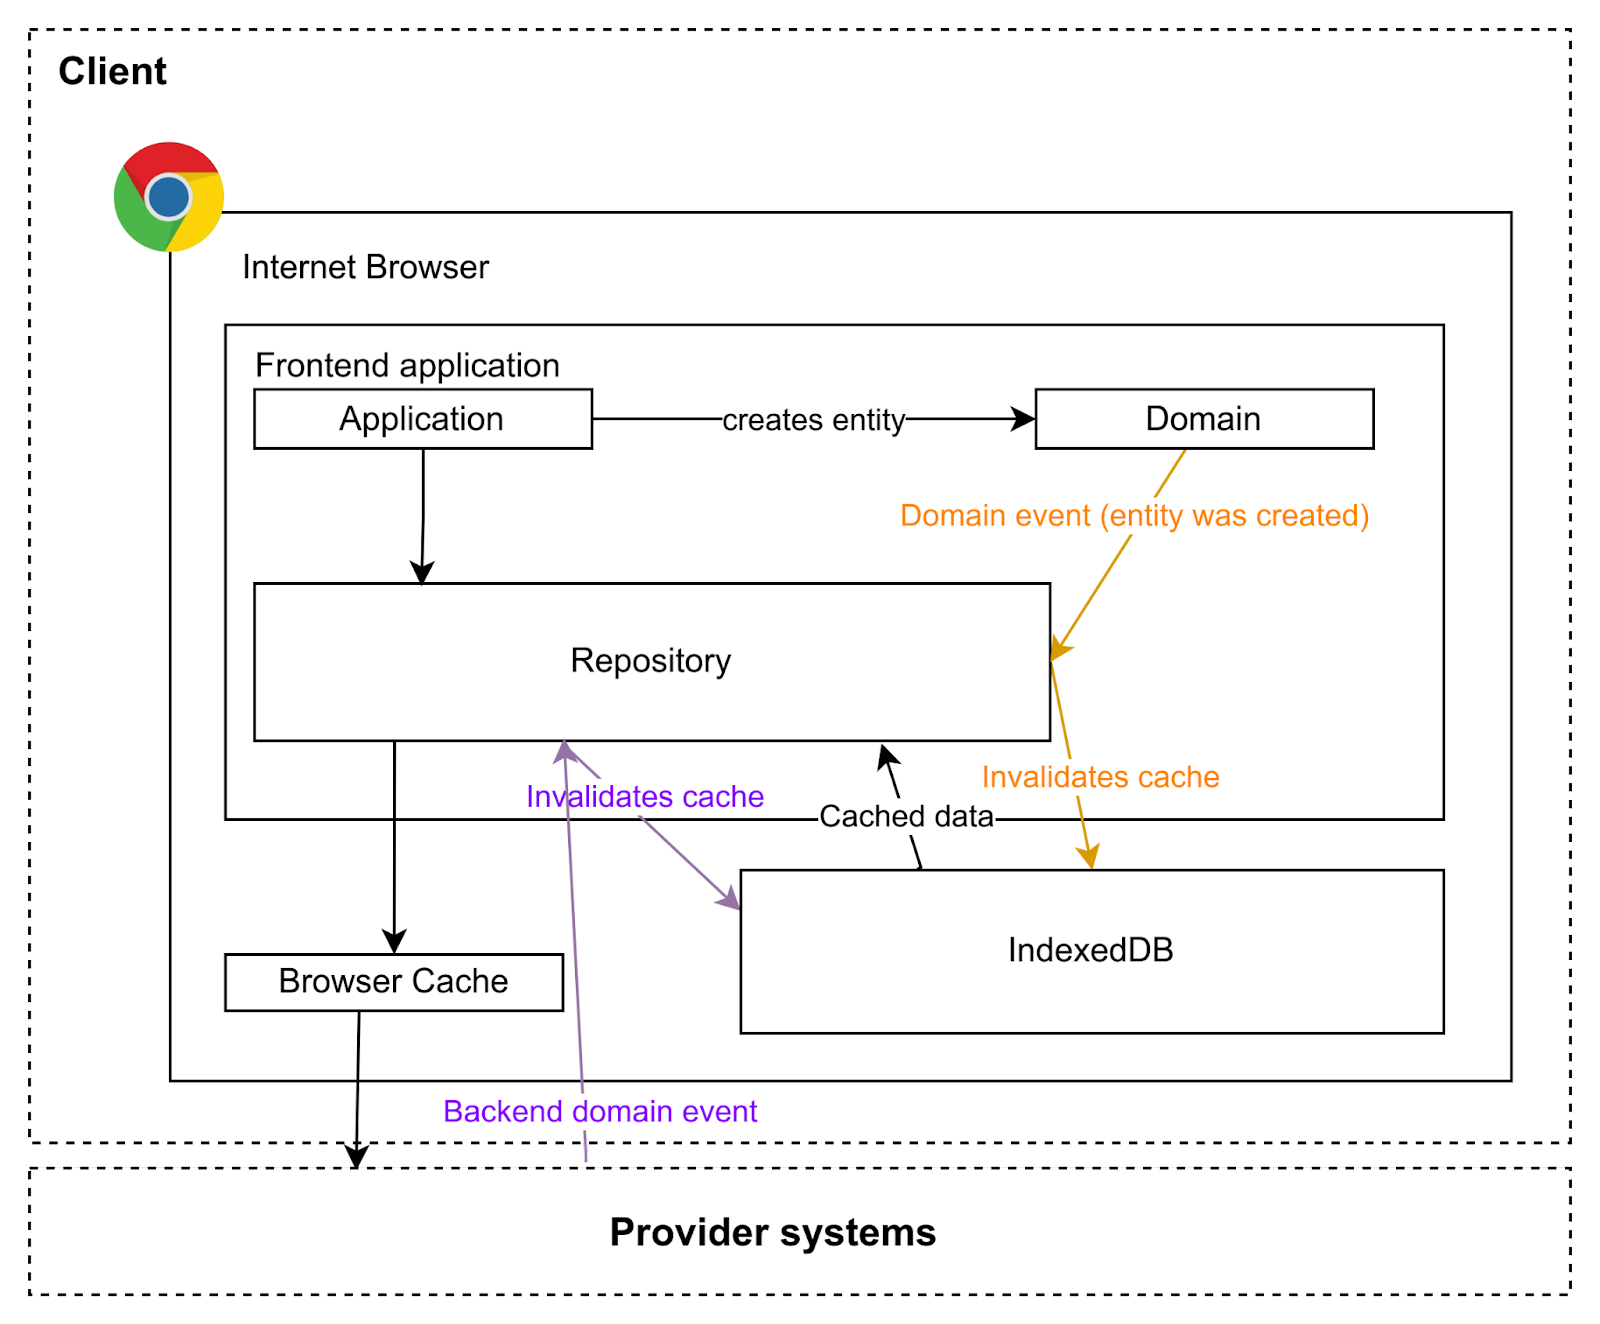 Client to provider systems